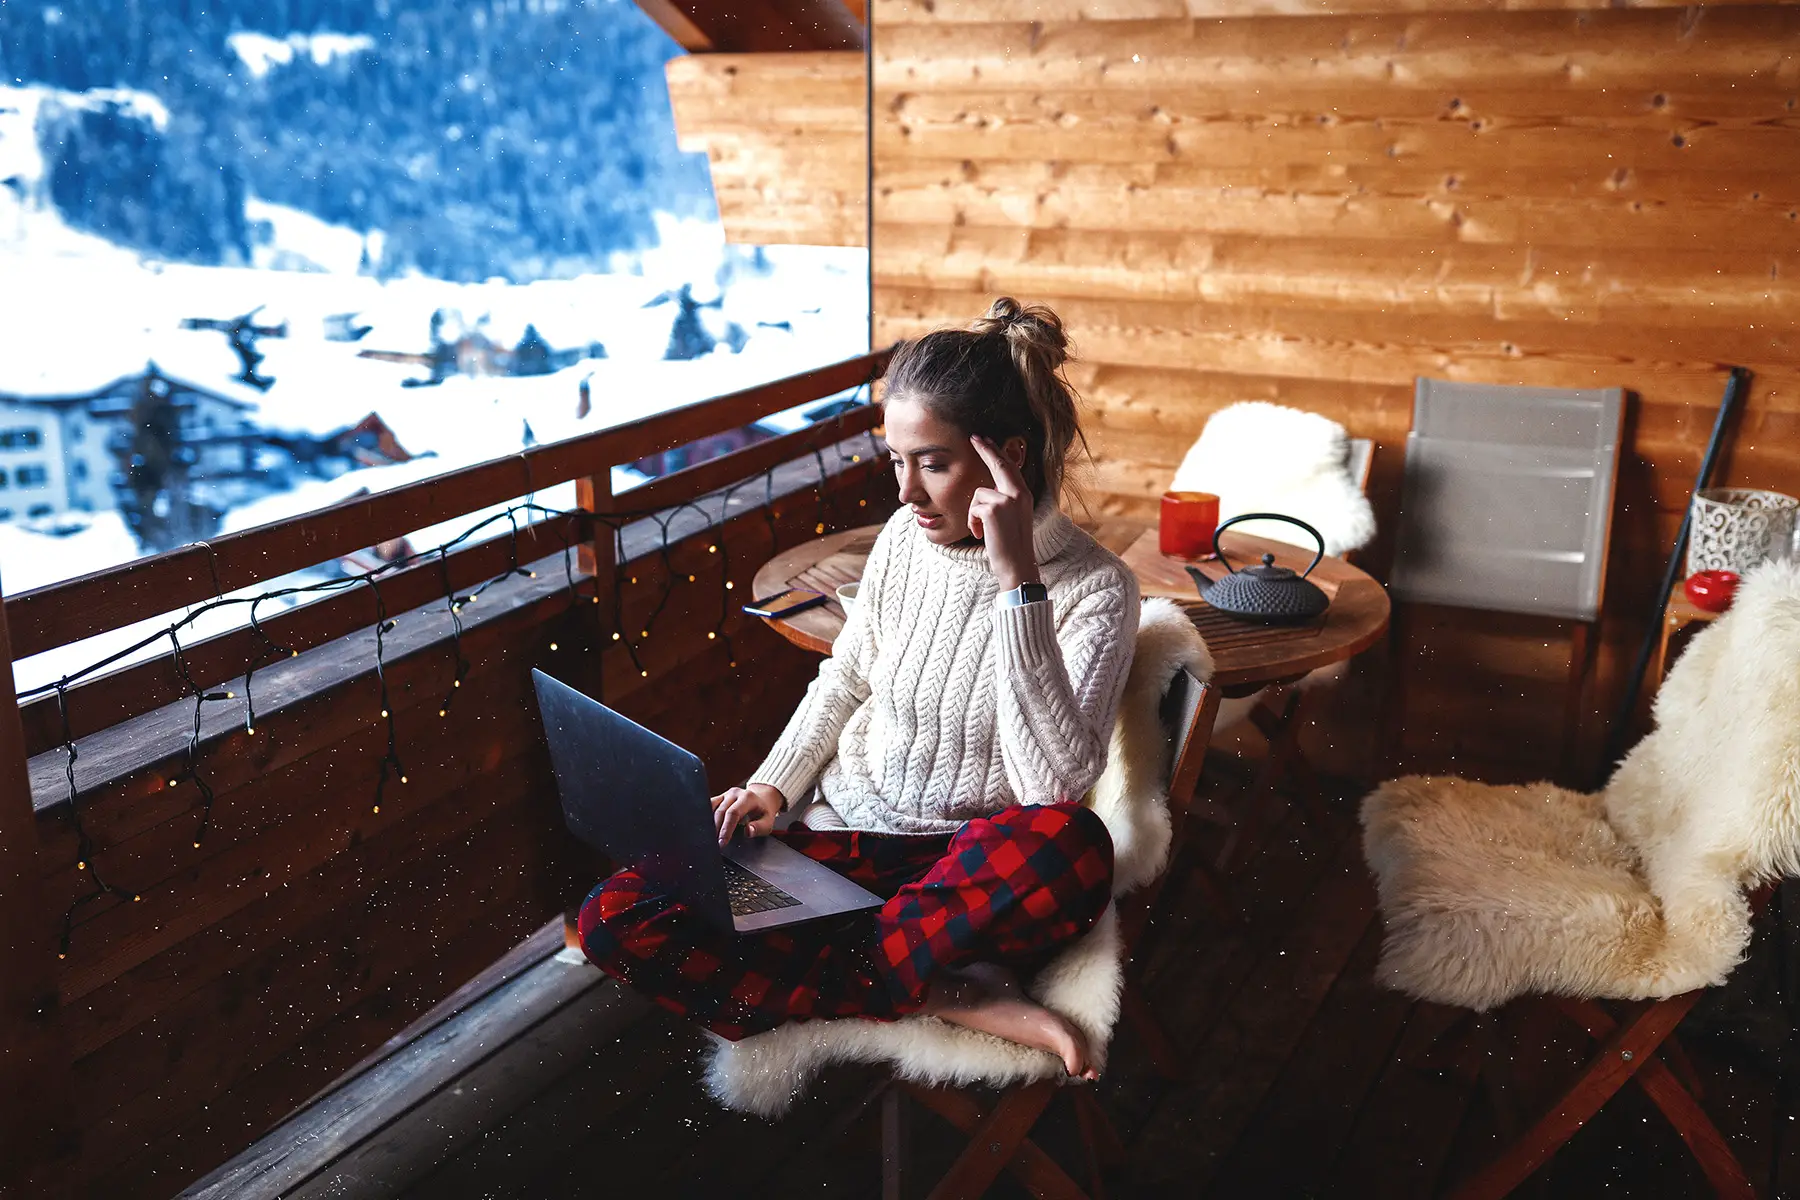 Working from home in a Swiss village